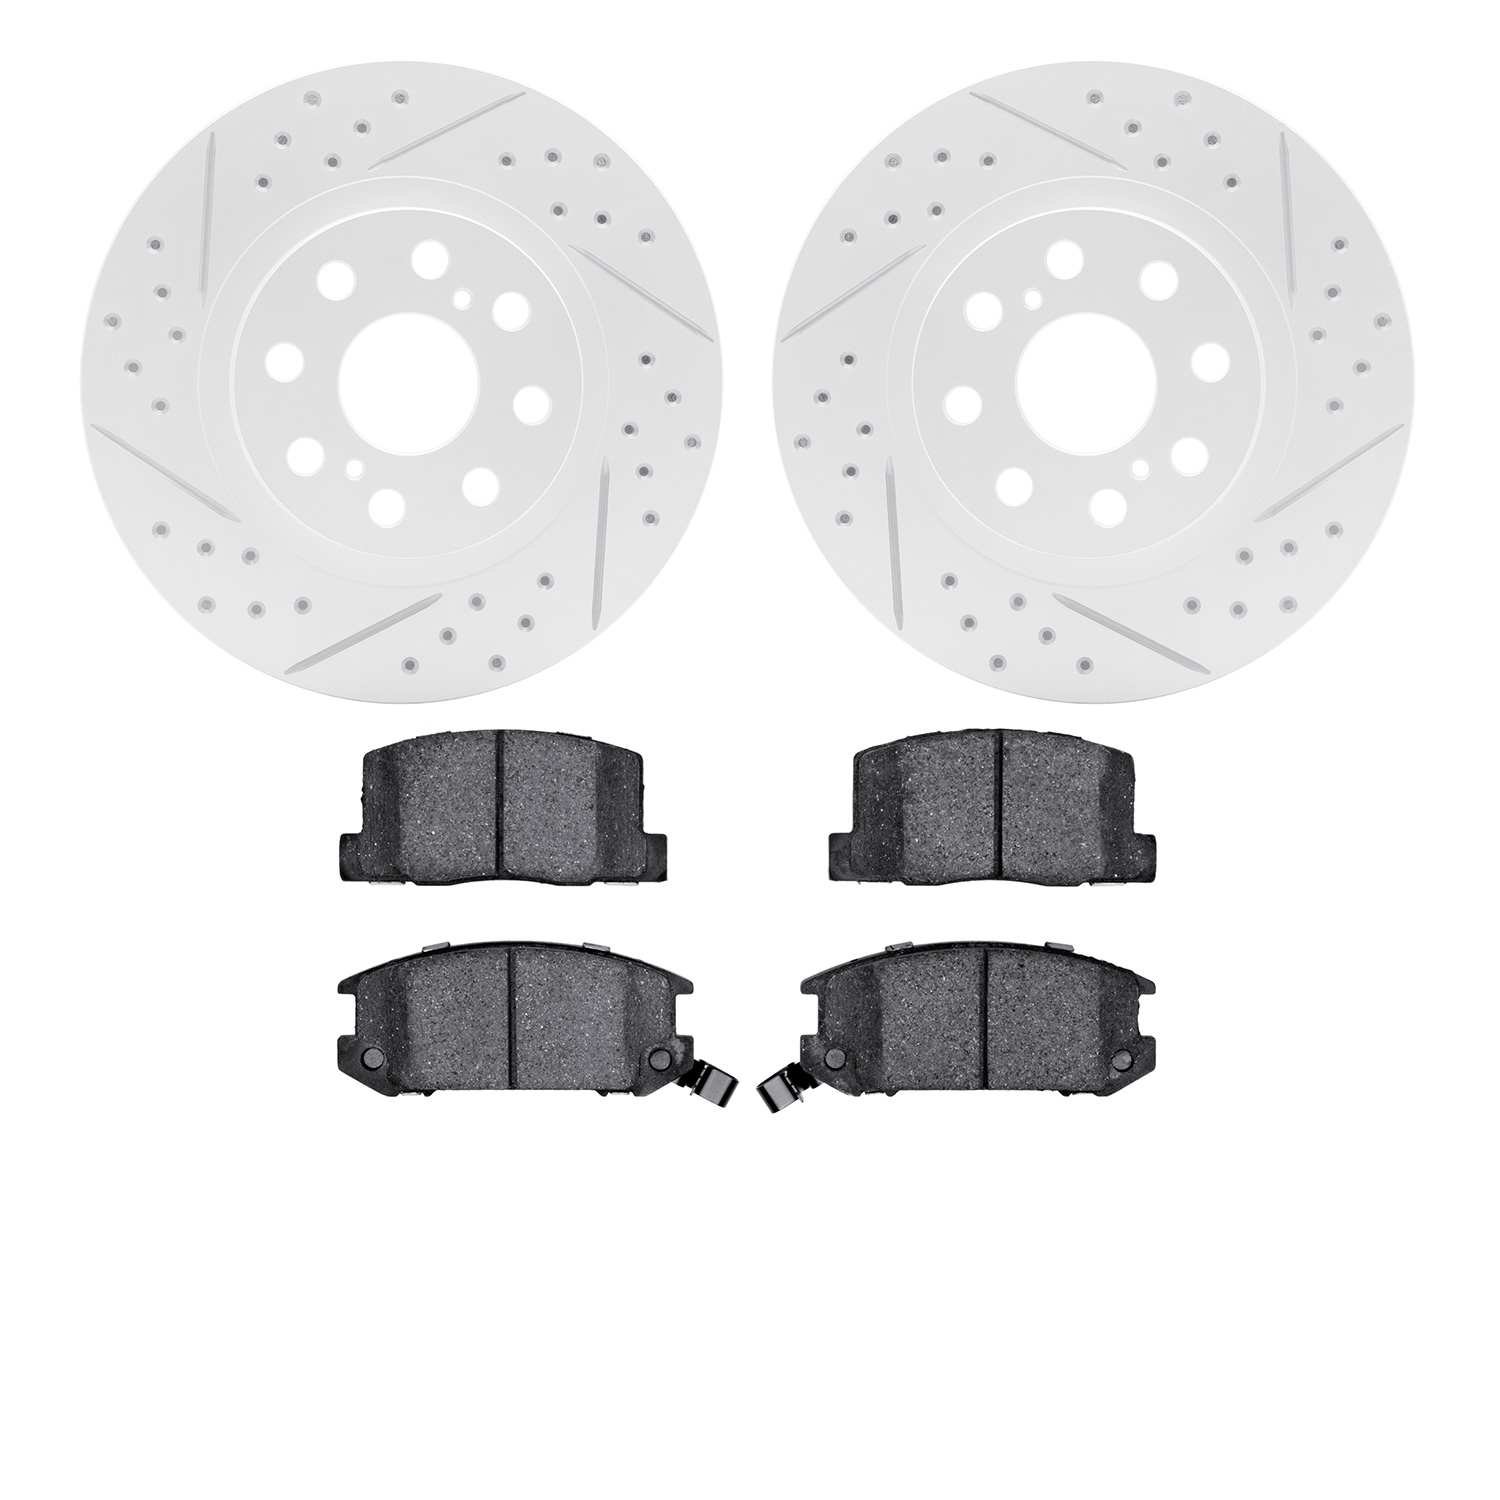 2502-76020 Geoperformance Drilled/Slotted Rotors w/5000 Advanced Brake Pads Kit, 2000-2005 Lexus/Toyota/Scion, Position: Rear